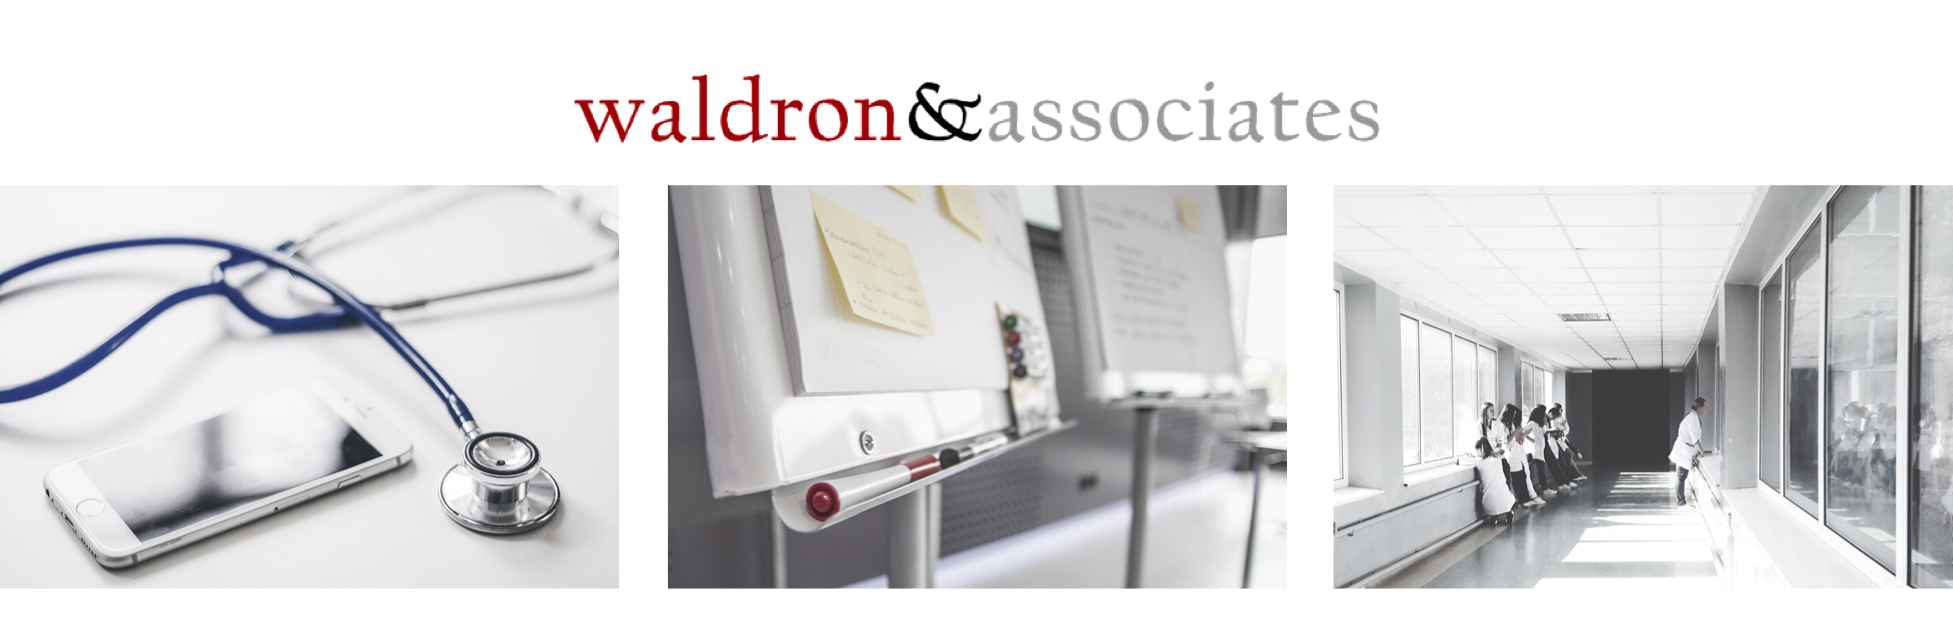 Waldron & Associates. Three Photos - 1. iPhone with stethoscope. - 2. Medical whiteboards with sticky notes. - 3. Hospital hallway with people in lab coats waiting.